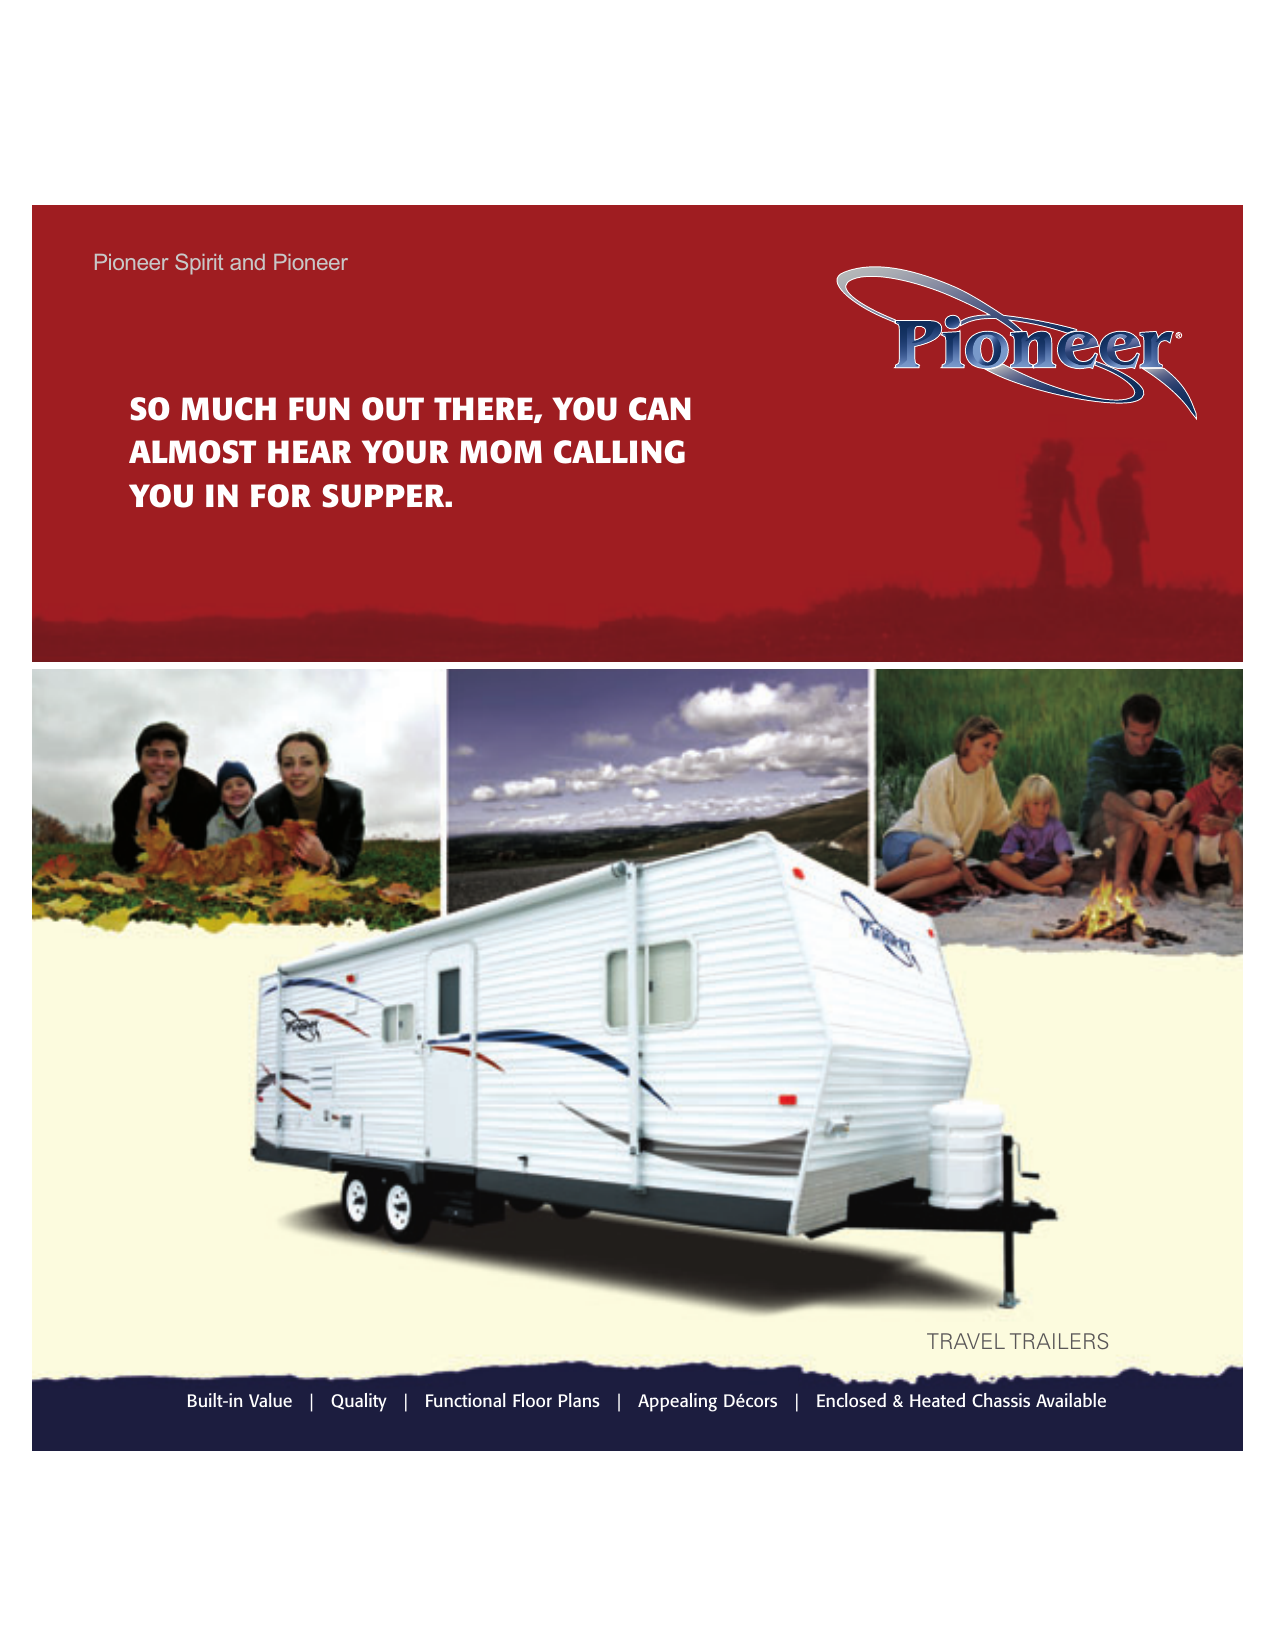 2006 Fleetwood Terry Travel Trailer Floor Plans | Review Home Co 2006 Fleetwood Pioneer Travel Trailer Owners Manual